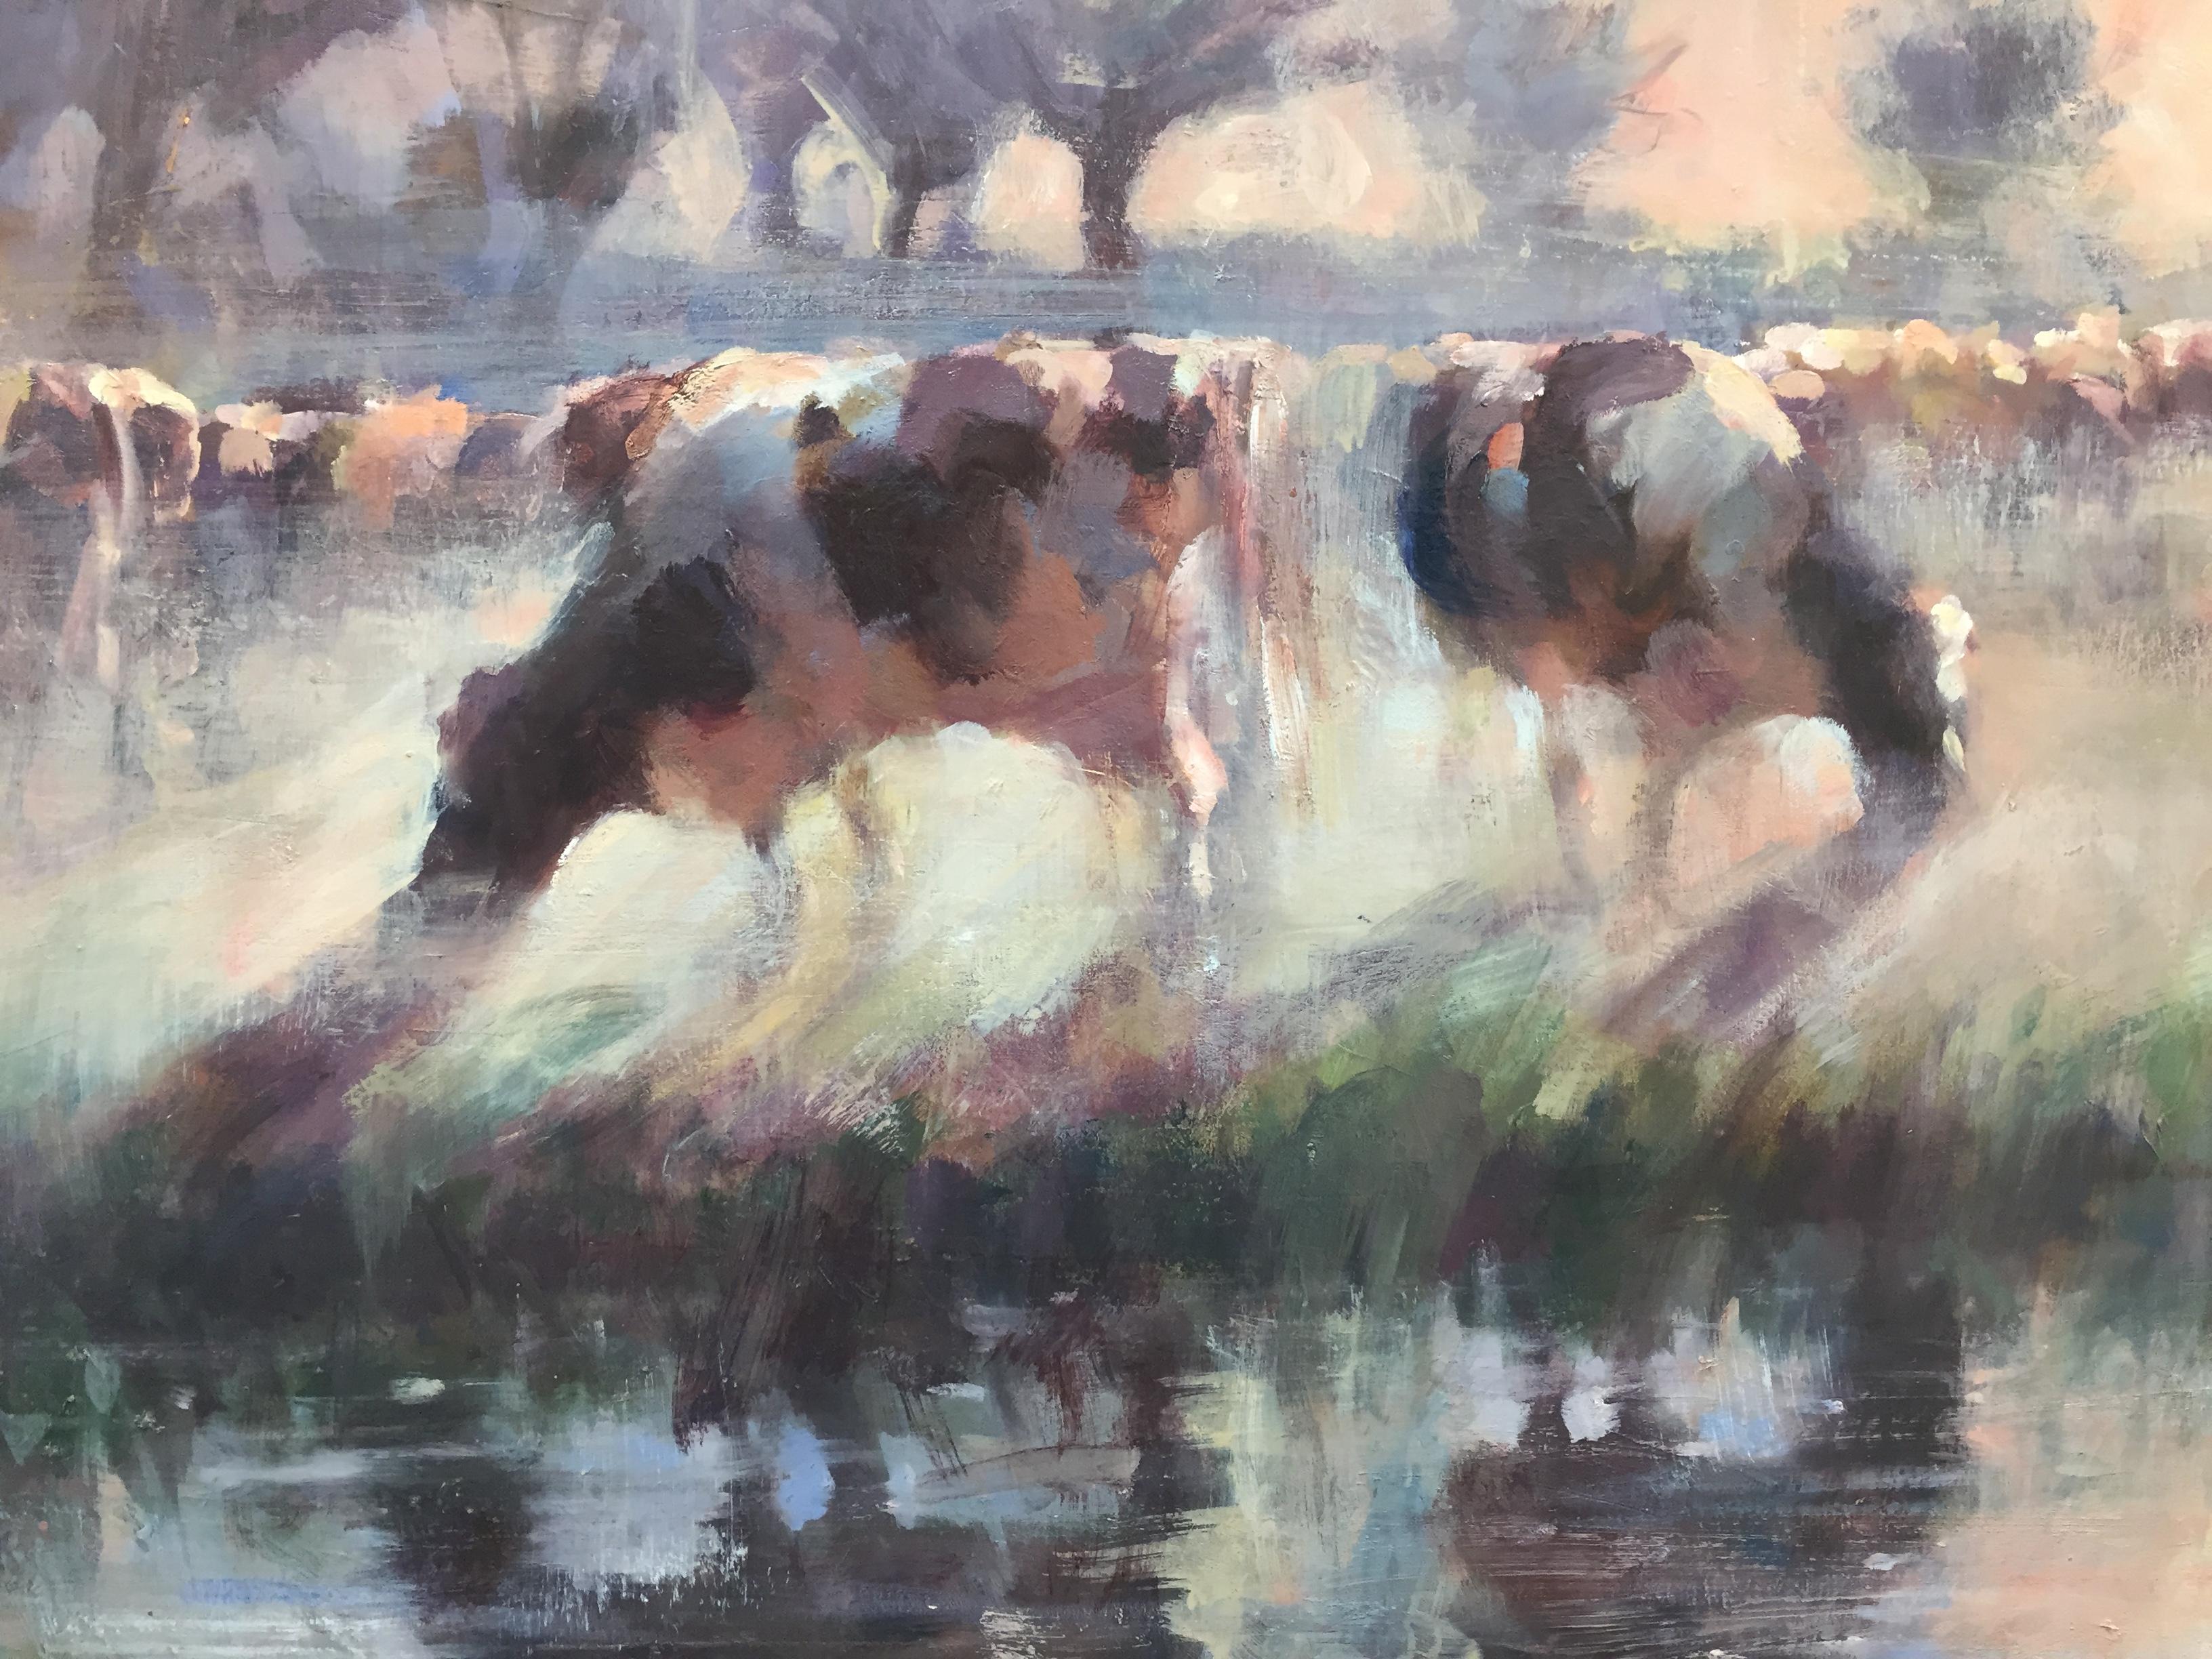 Cows in the Morning-21st Century Contemporary Dutch Landscape Painting 3